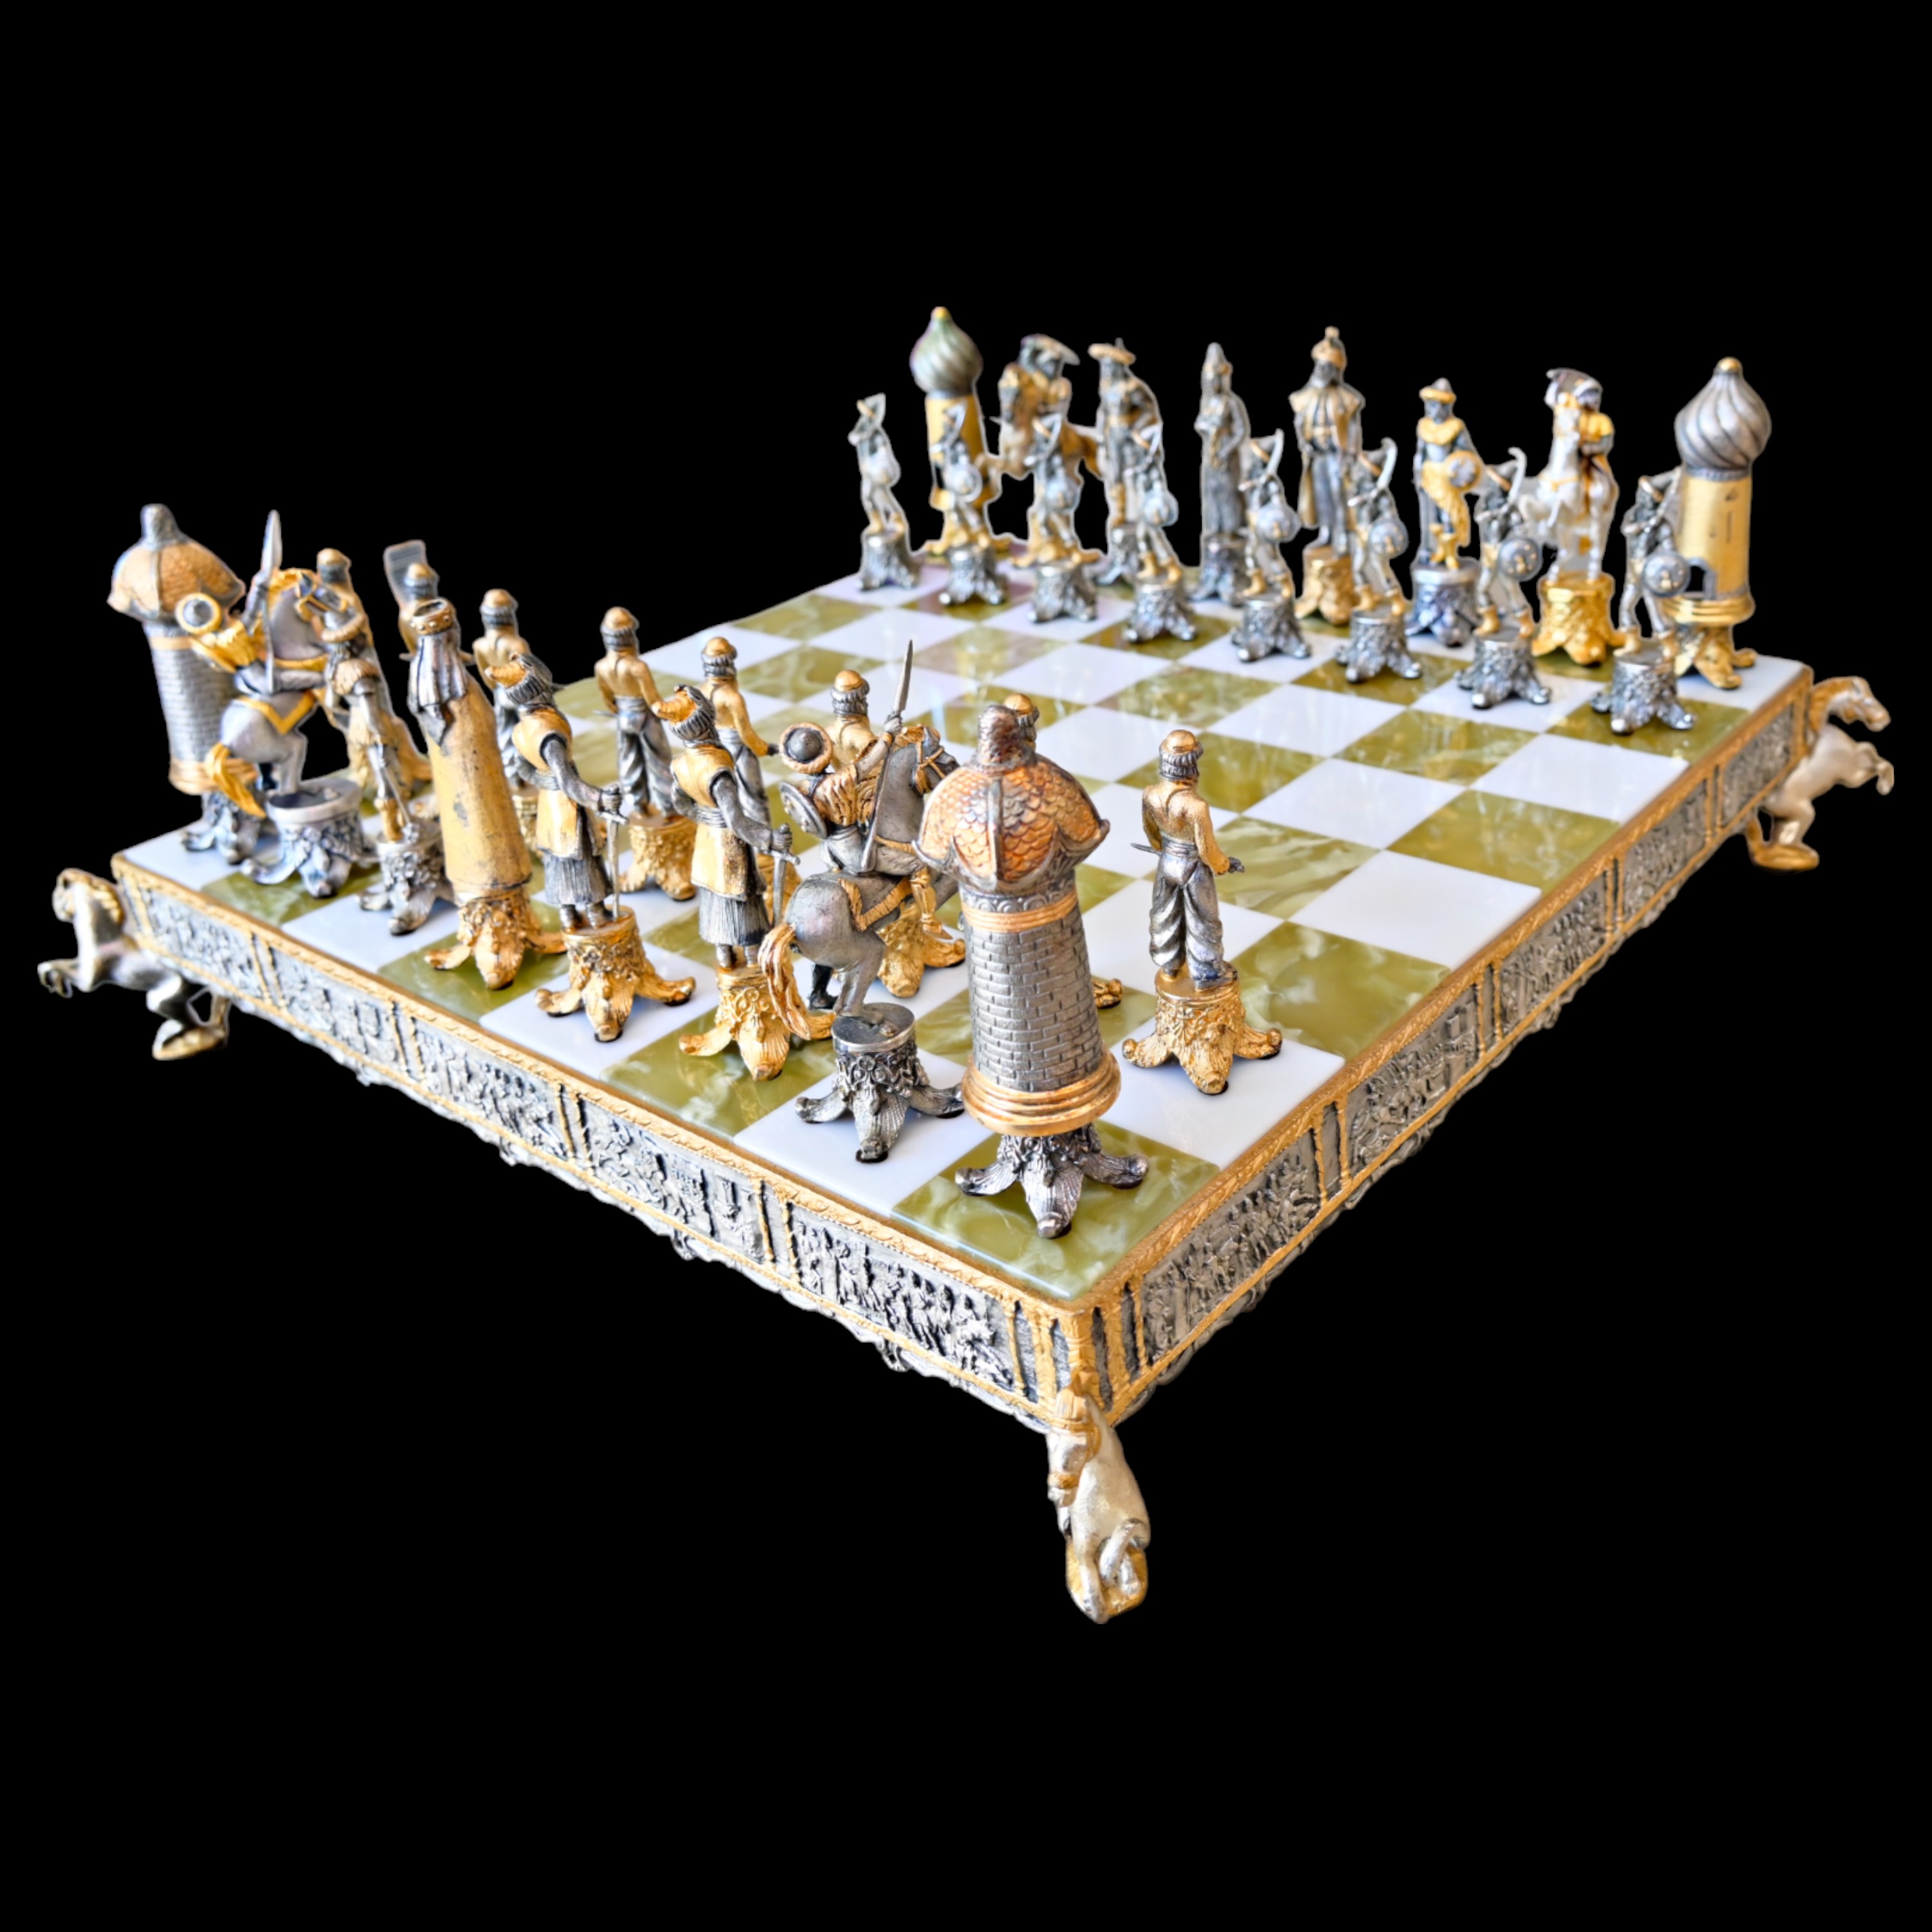 Piero Benzoni Onyx and Marble Silver-Plated and Gilt Bronze Chess Set, 70-80 years of the 20th _. - Image 2 of 13